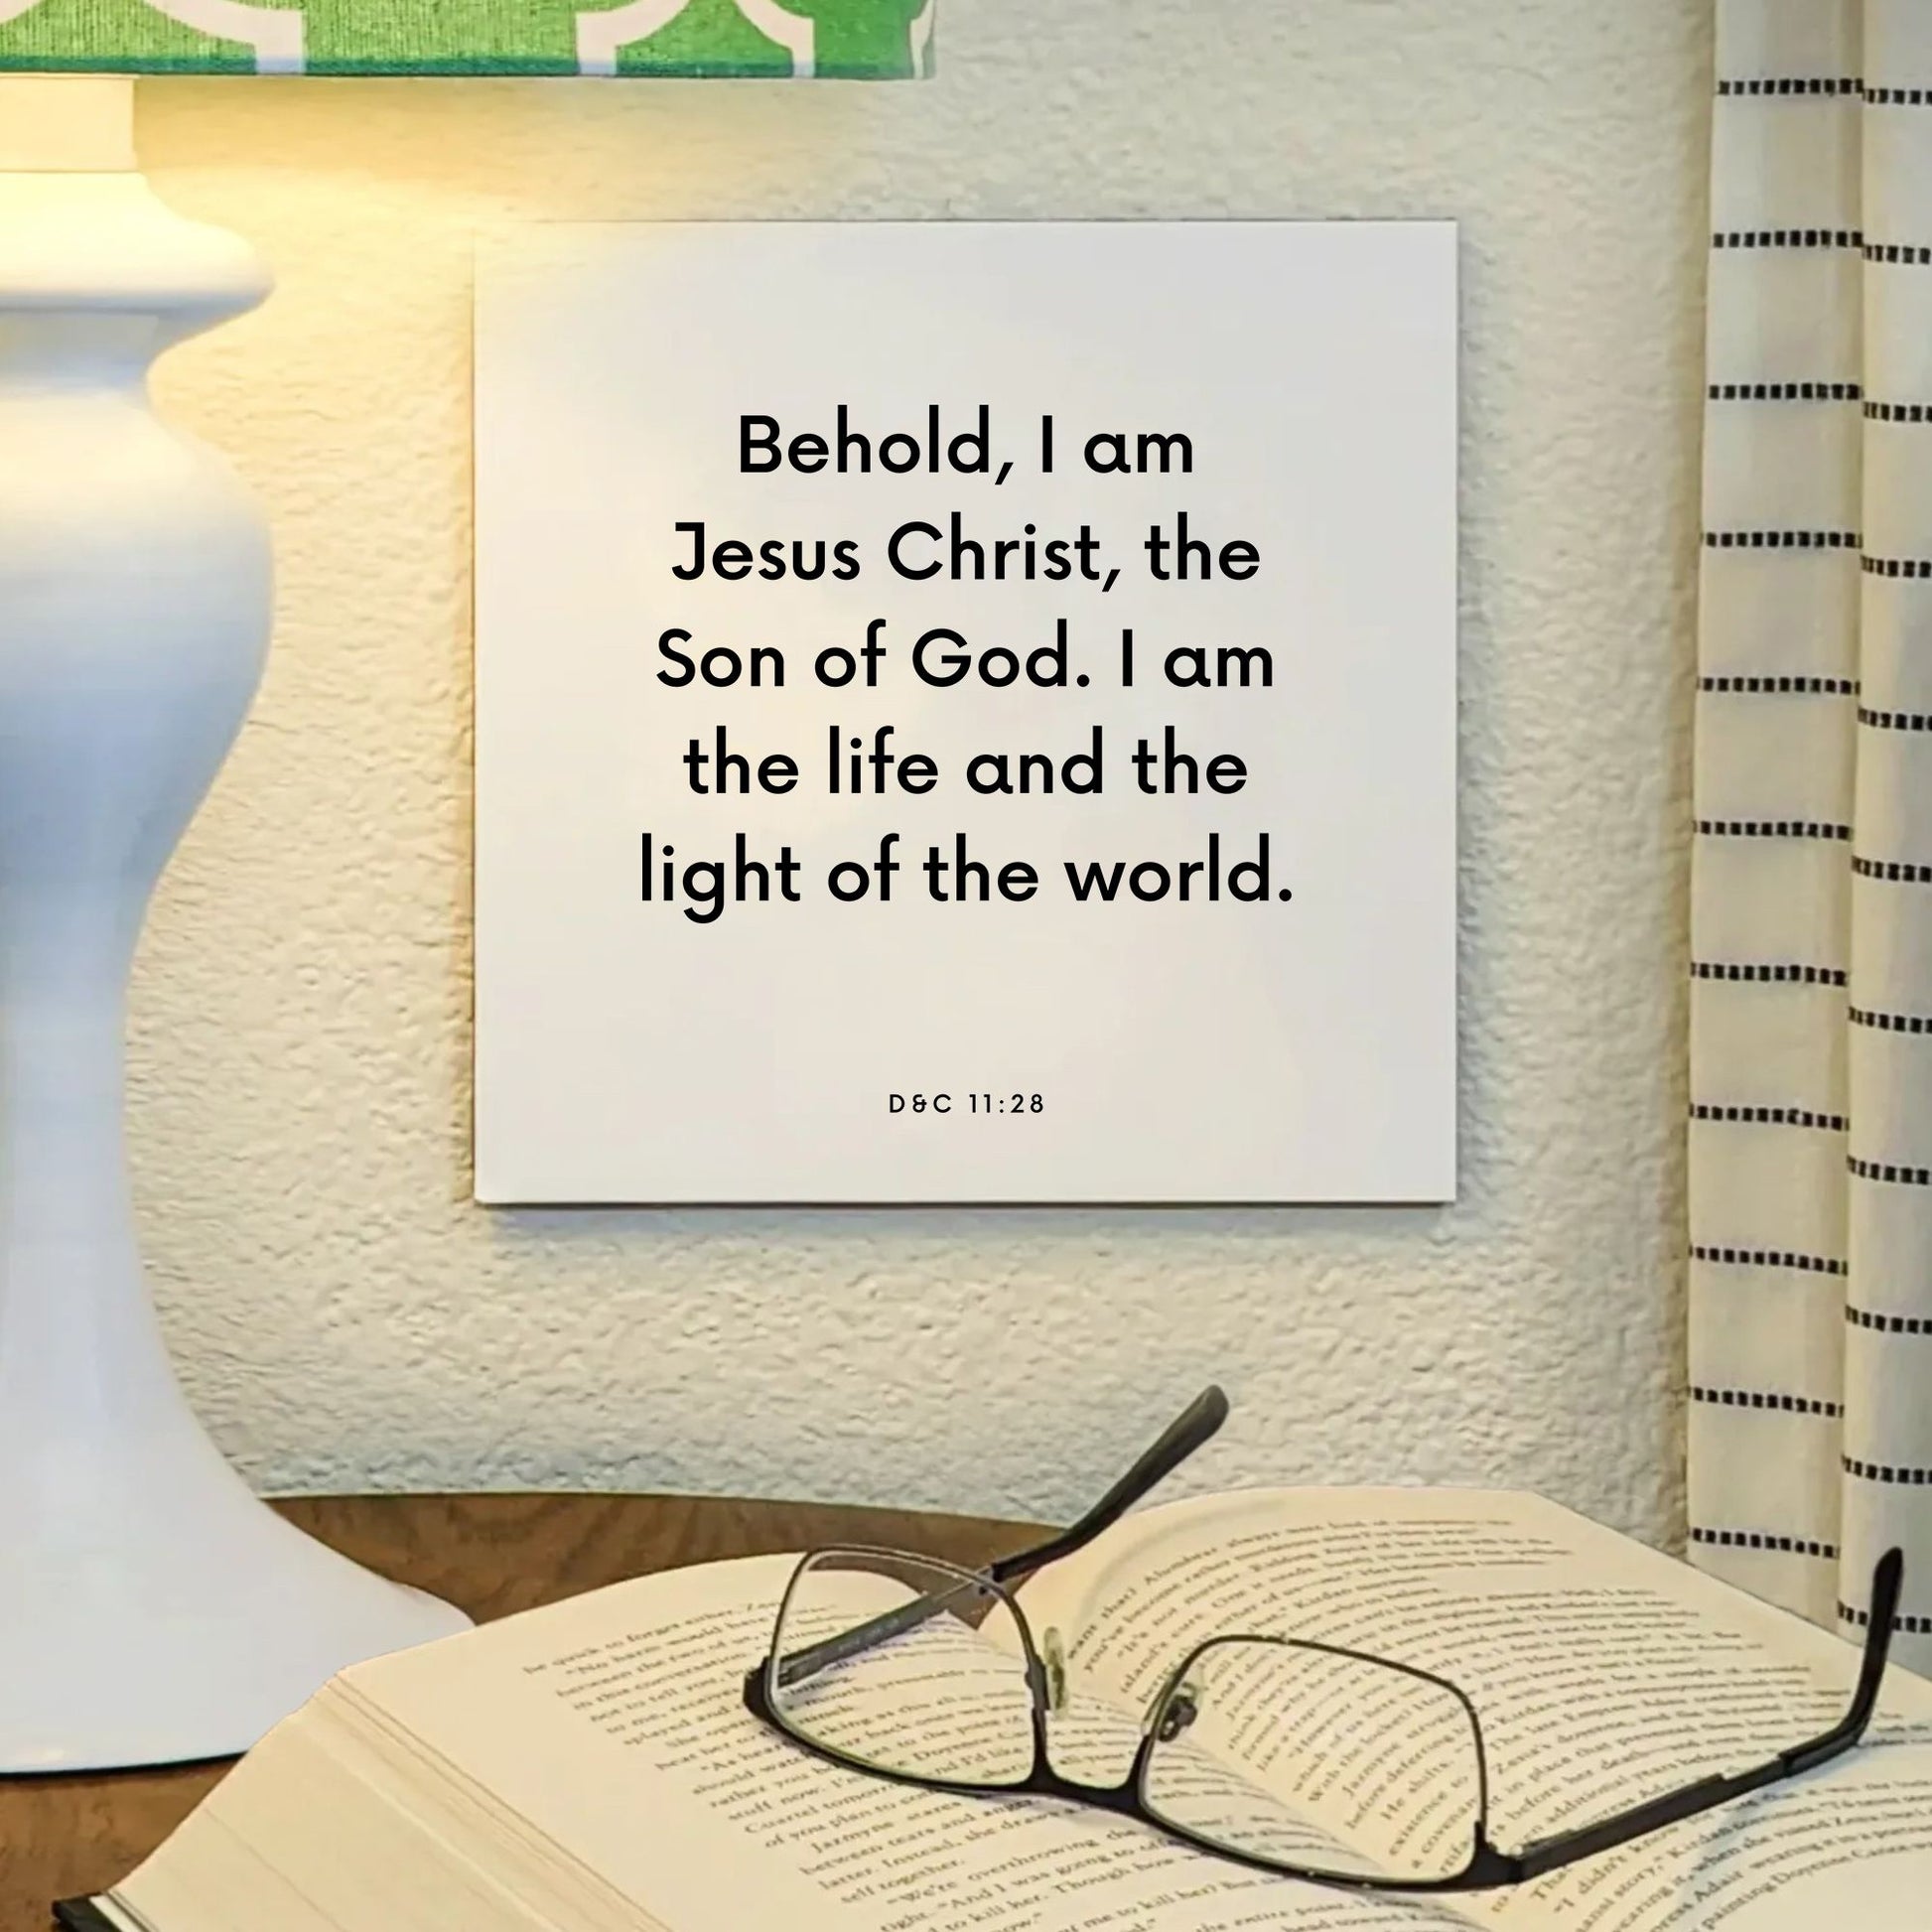 Lamp mouting of the scripture tile for D&C 11:28 - "Behold, I am Jesus Christ, the Son of God"